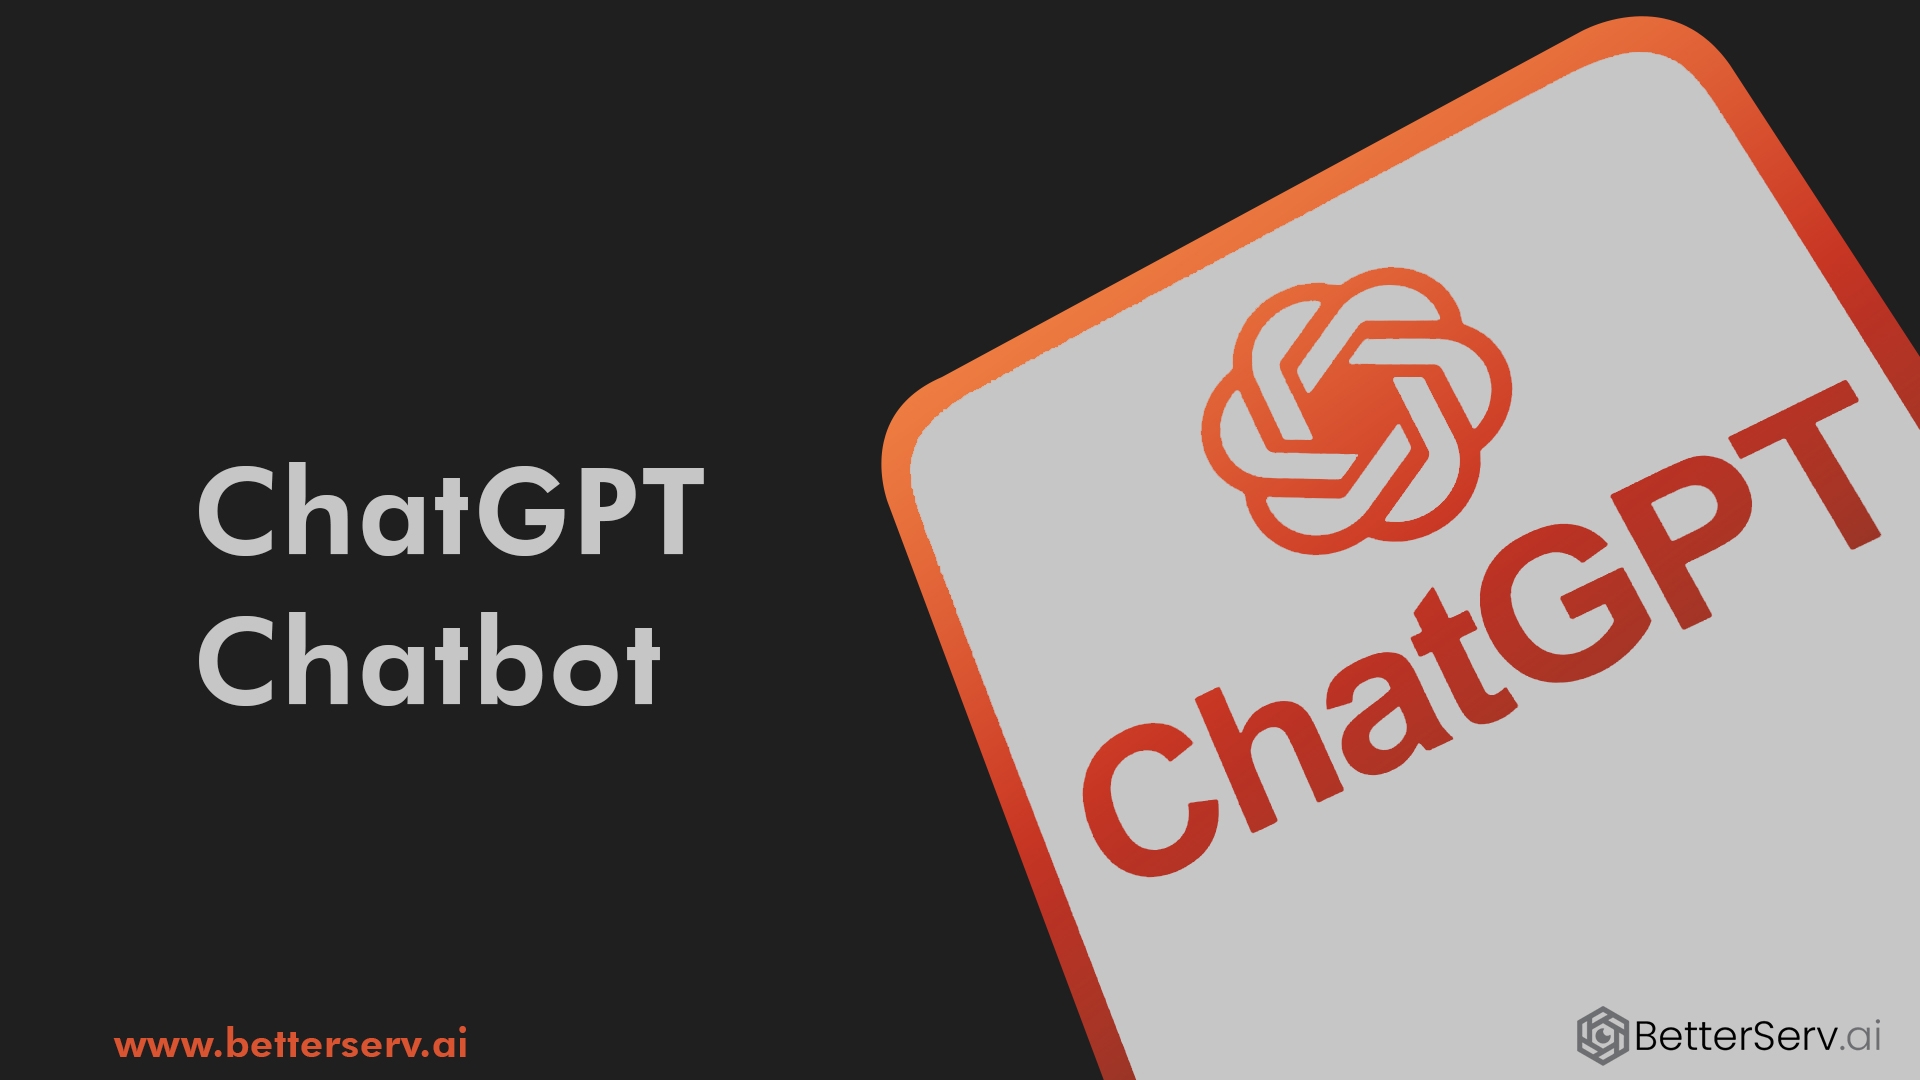 BetterServ.AI's ChatGPT Chatbot Delivers Instant Help!